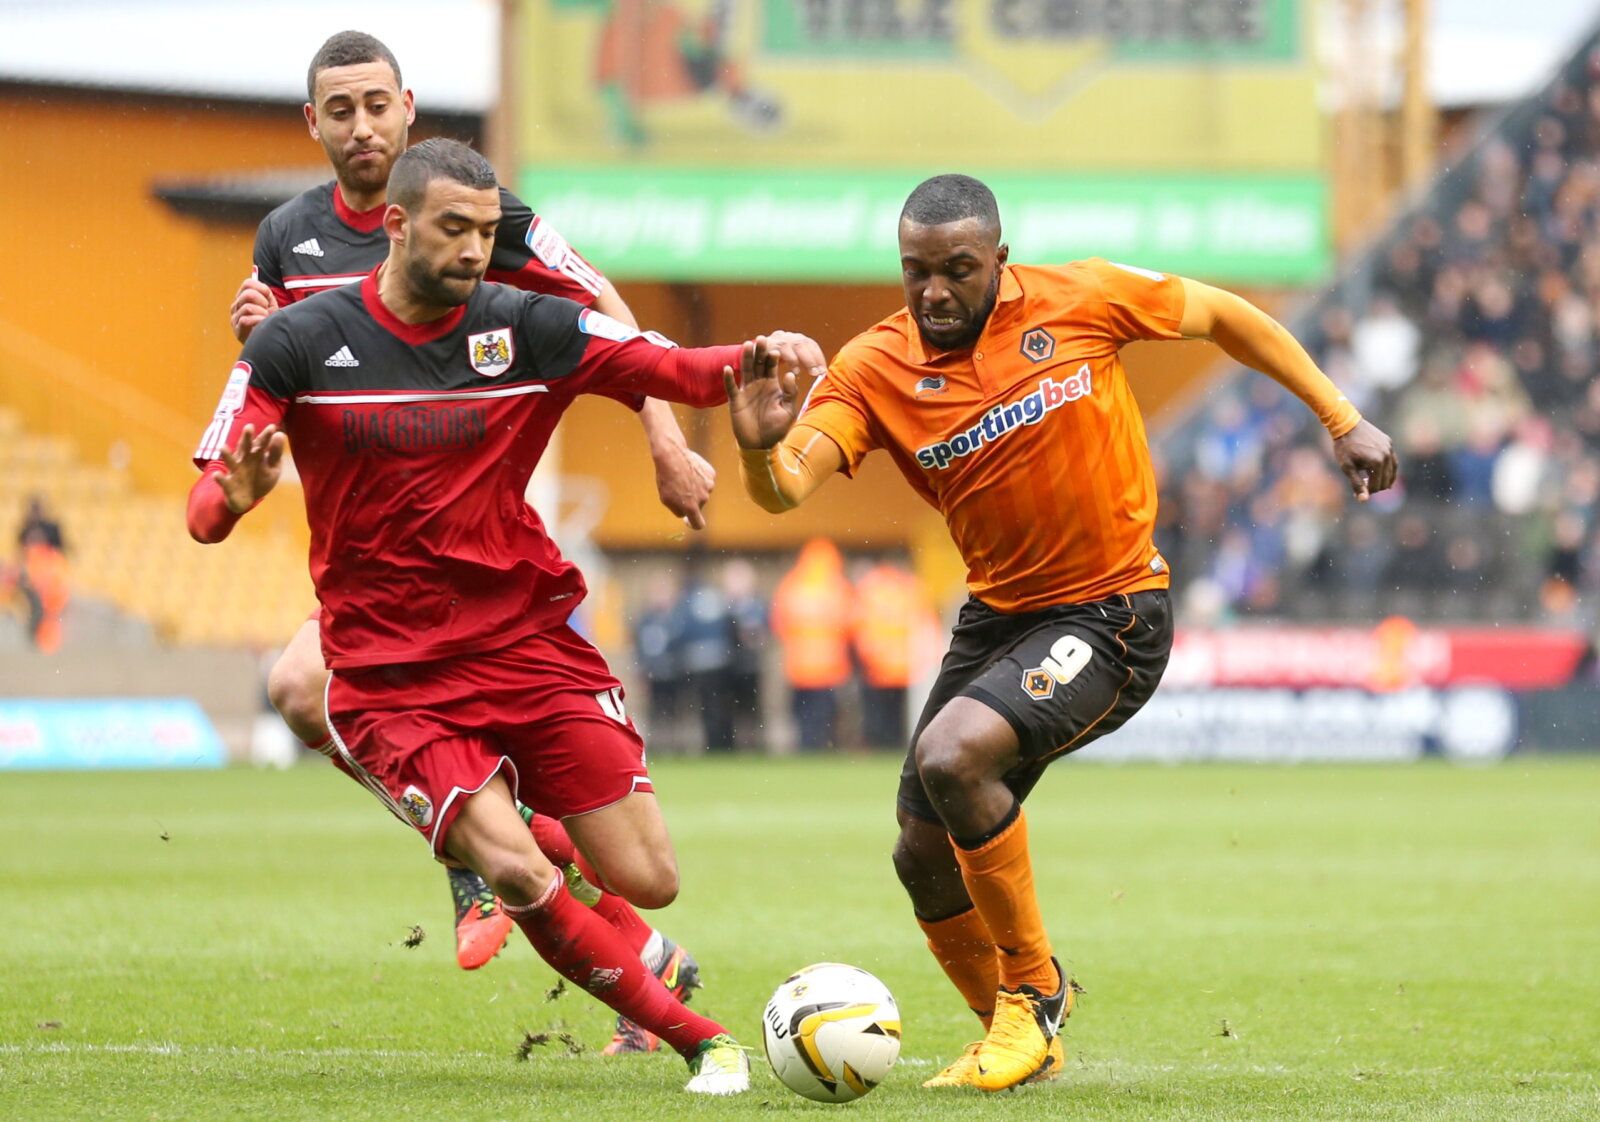 Football - Wolverhampton Wanderers v Bristol City - npower Football League Championship - Molineux - 12/13 - 16/3/13 
Wolves' Sylvan Ebanks Blake in action against Bristol City's Liam Fontaine 
Mandatory Credit: Action Images / Peter Cziborra 
EDITORIAL USE ONLY. No use with unauthorized audio, video, data, fixture lists, club/league logos or live services. Online in-match use limited to 45 images, no video emulation. No use in betting, games or single club/league/player publications.  Please co